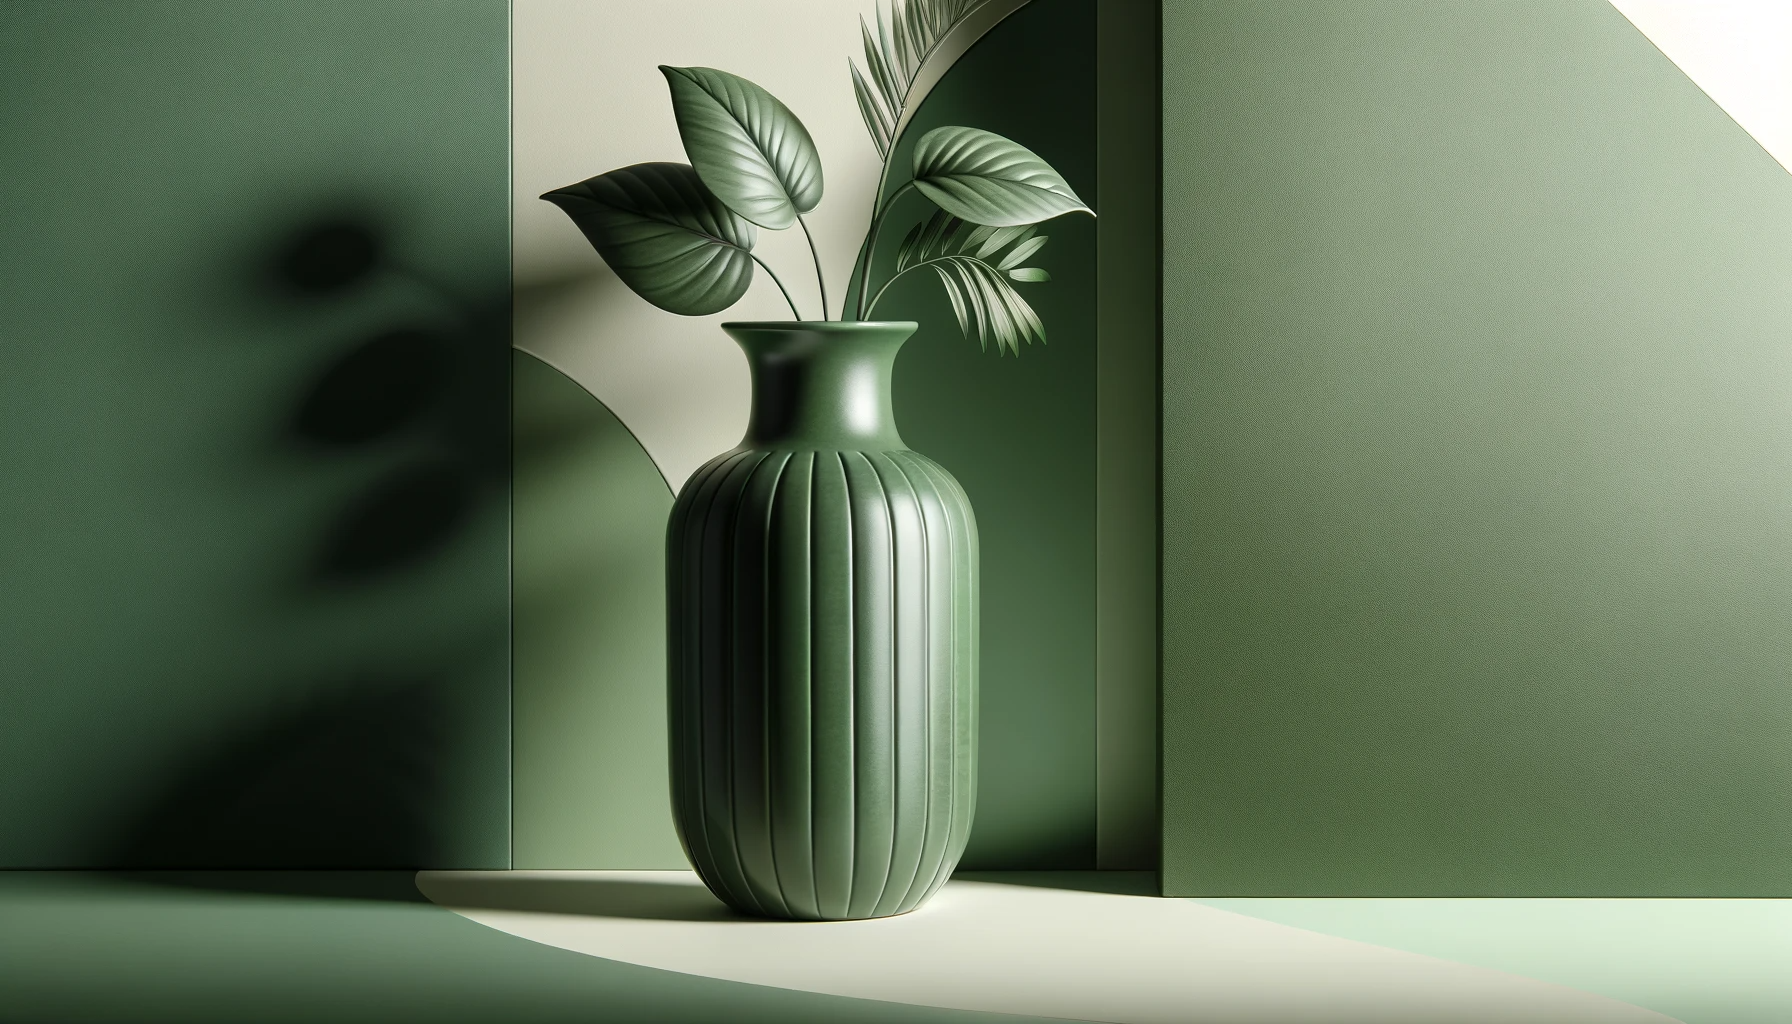 monochromatic photography image stylish home décor item, a vase, in varying shades of green